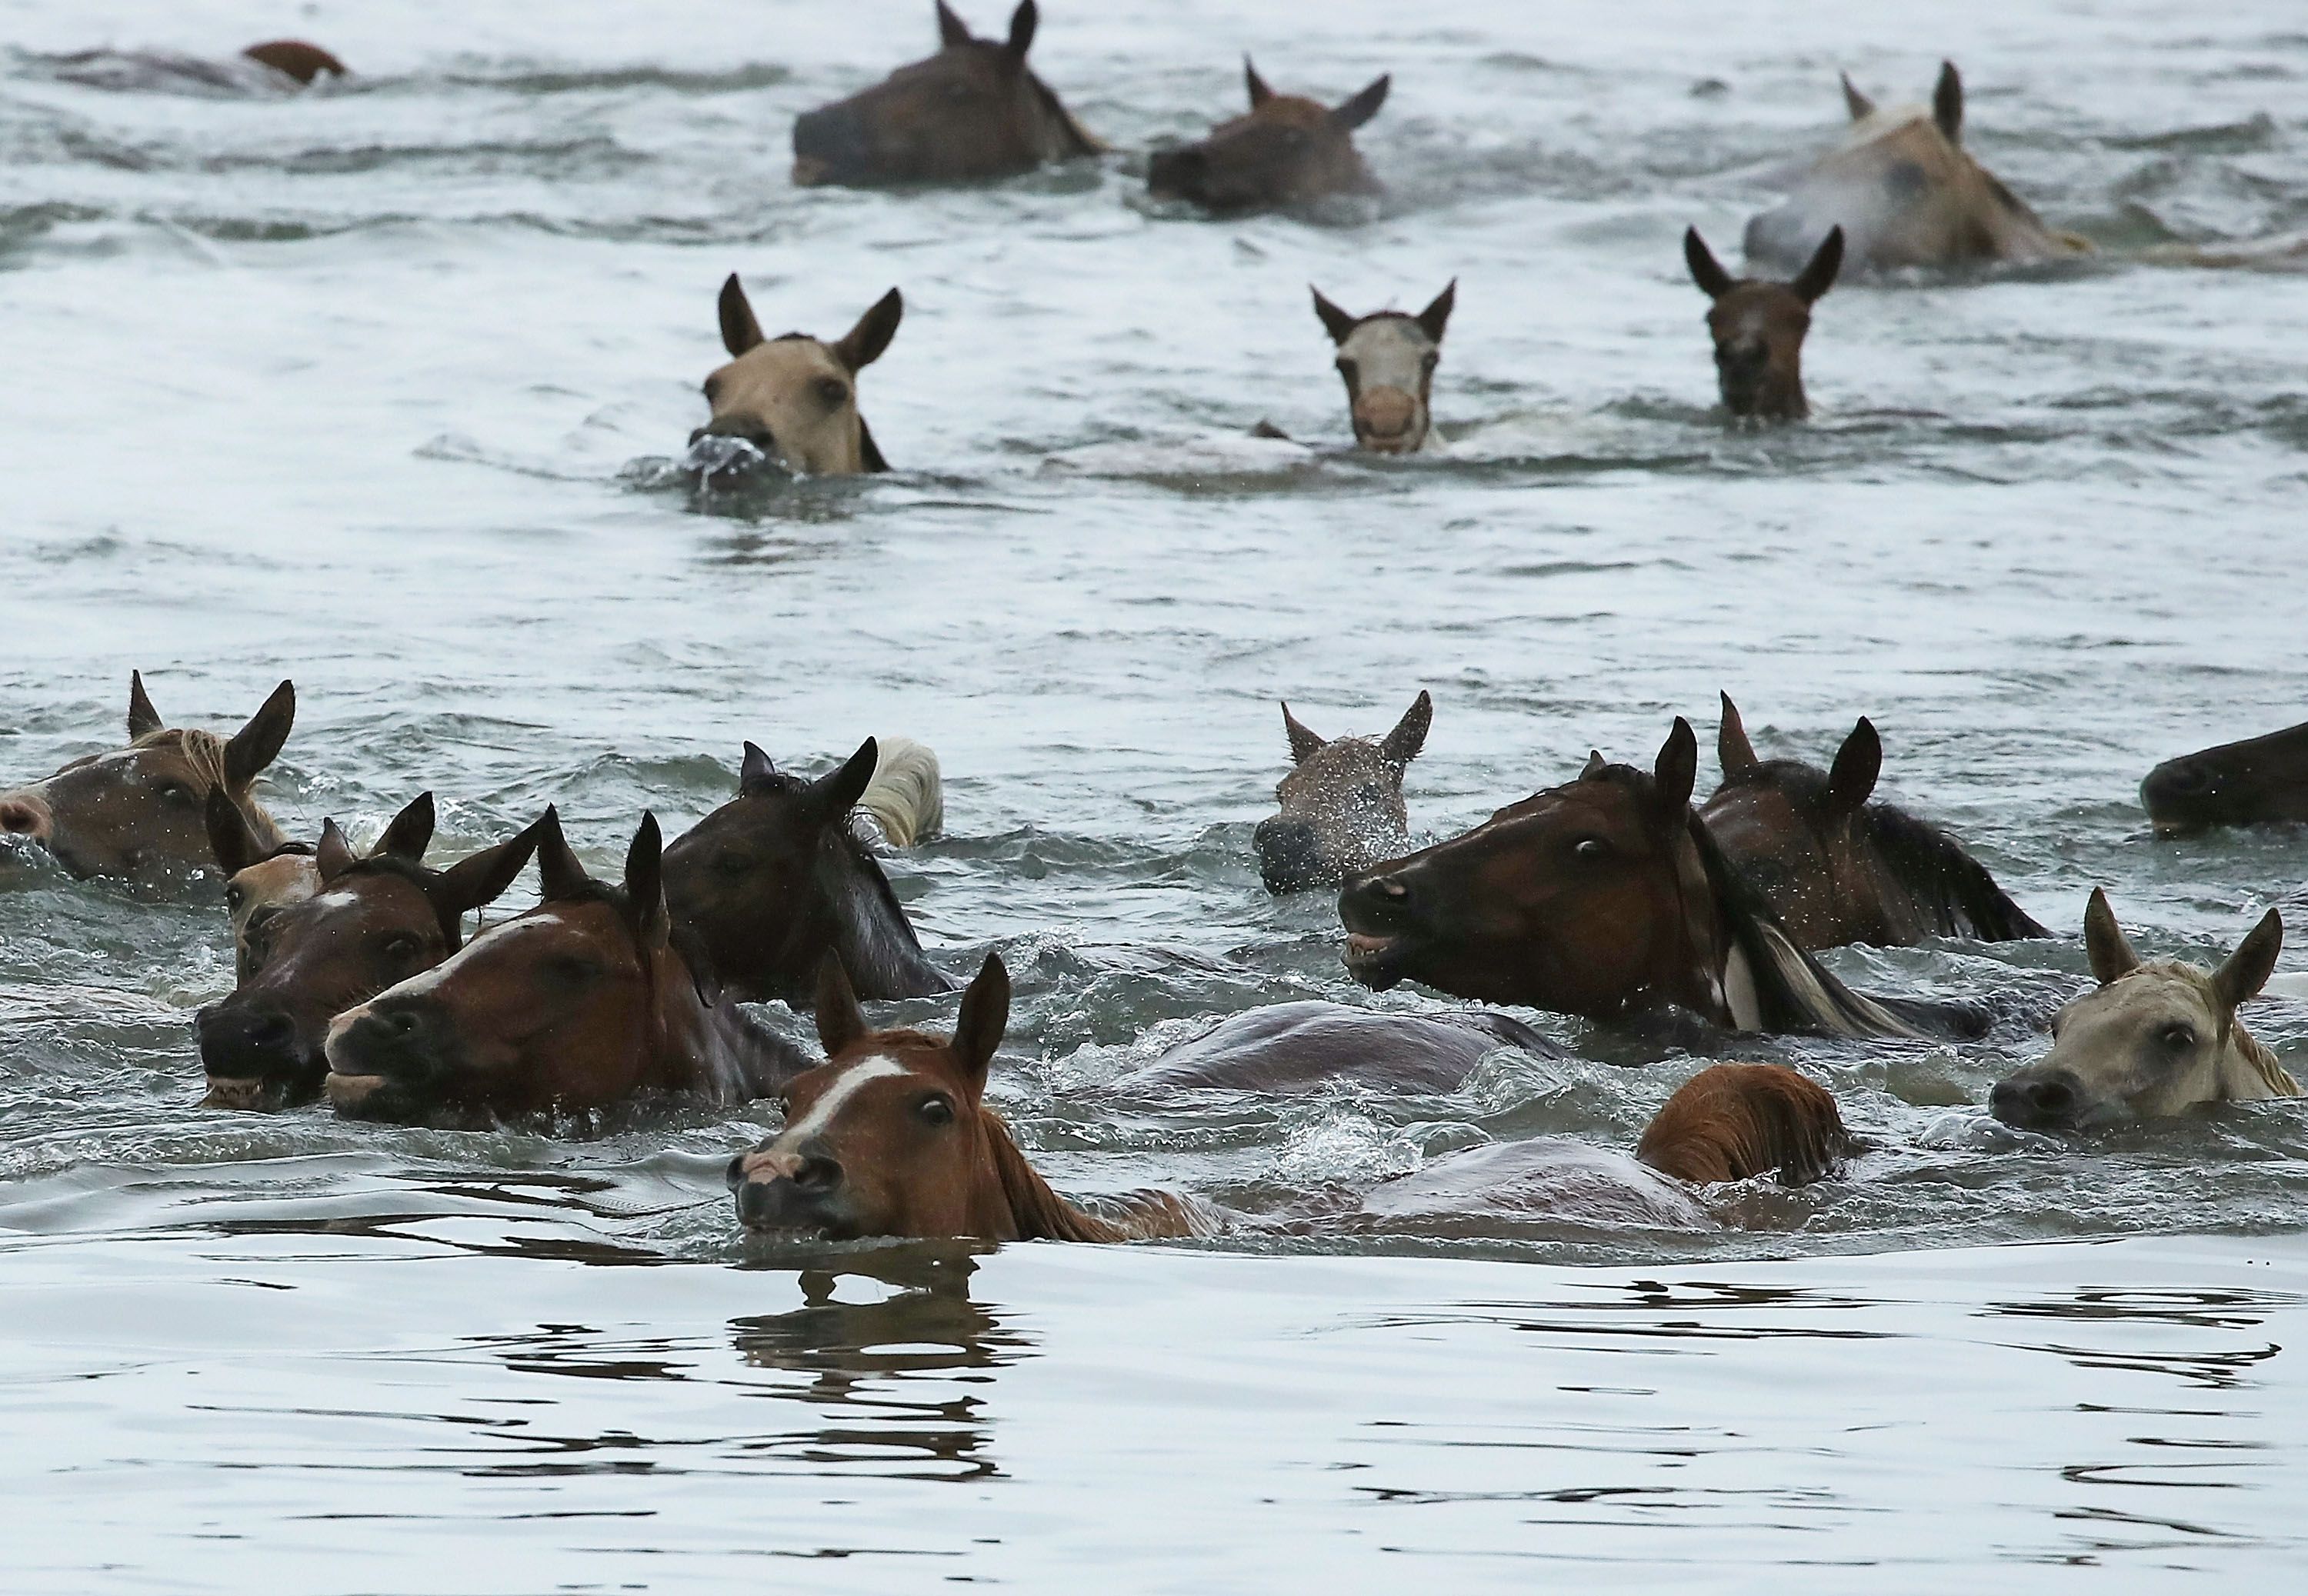 Wild ponies swim across the Assateague Channel during the 93rd annual Pony Swim from Assateague Island to Chincoteague on July 25, 2018 in Chincoteague, Virginia. (Photo by Mark Wilson/Getty Images)